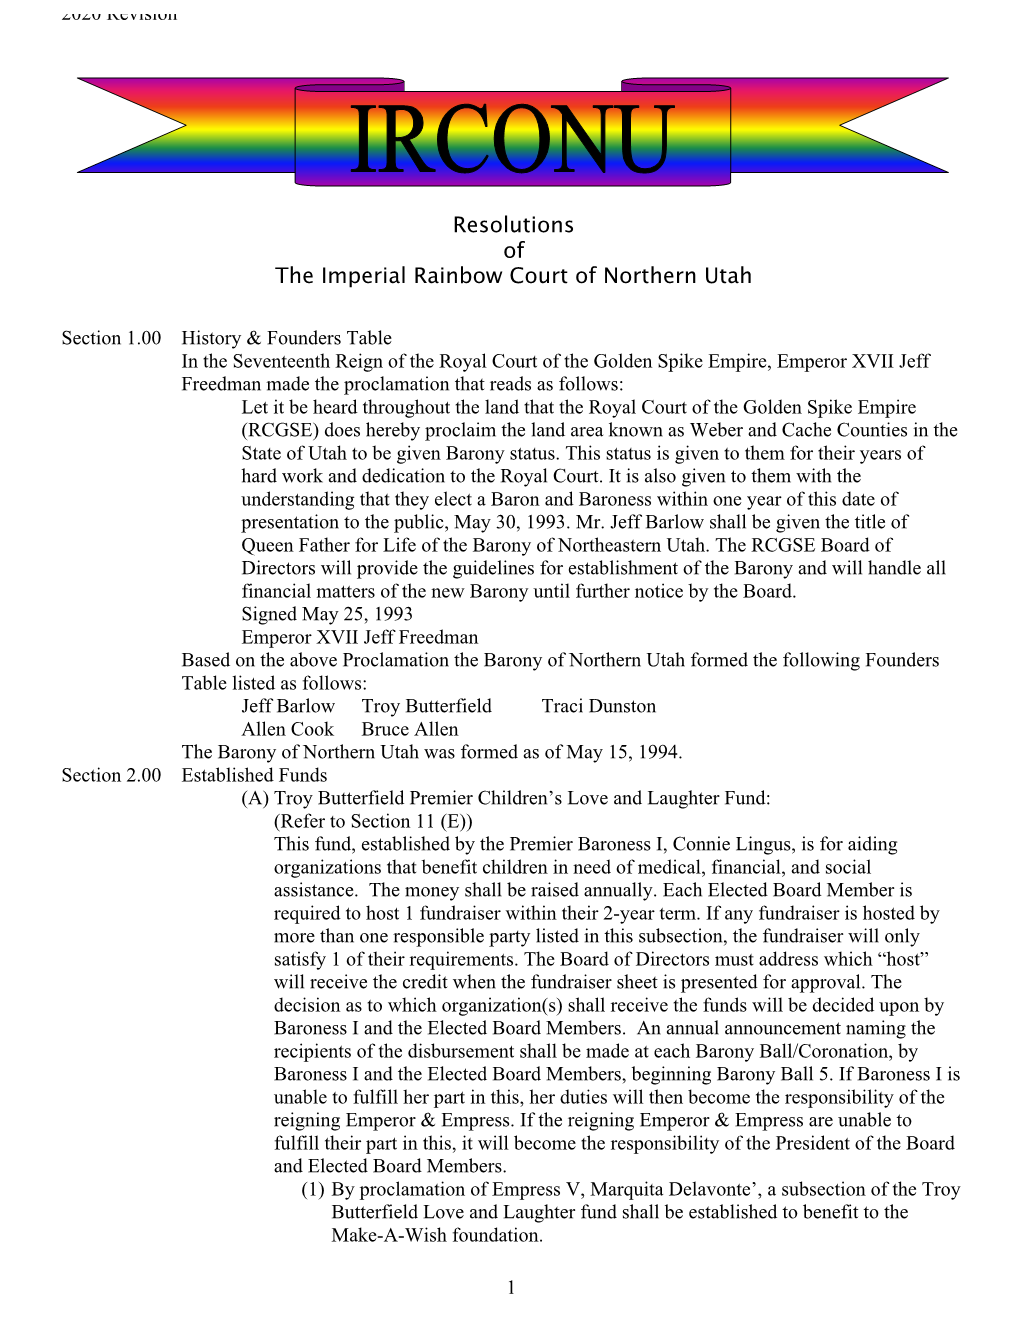 Resolutions of the Imperial Rainbow Court of Northern Utah